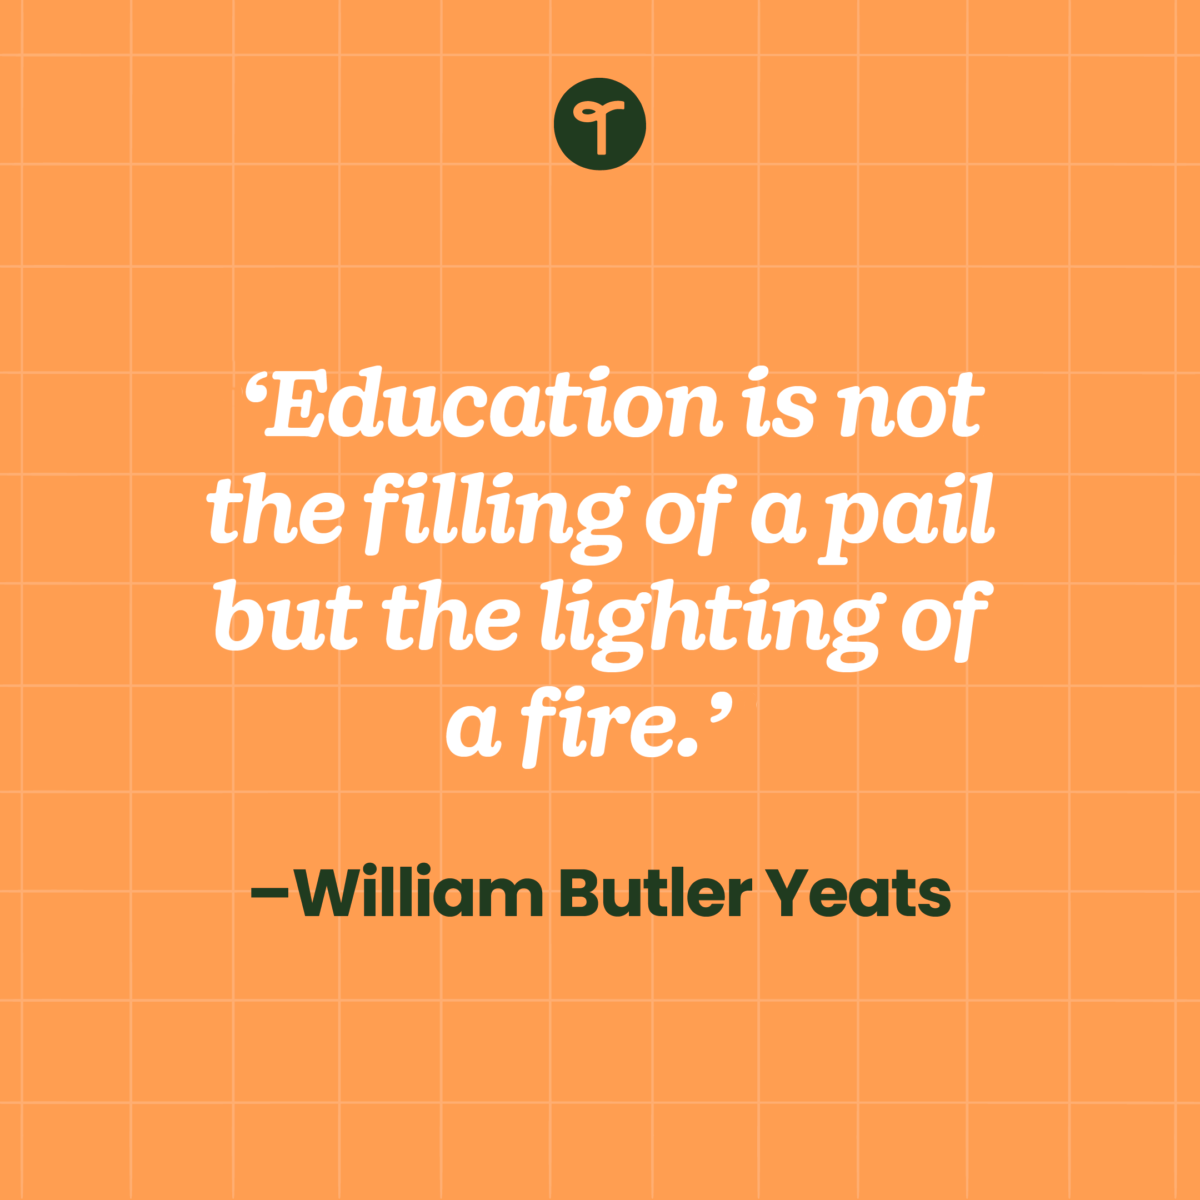 'Education is not the filling of a pail but the lighting of a fire.' – William Butler Yeats written on an orange checked background